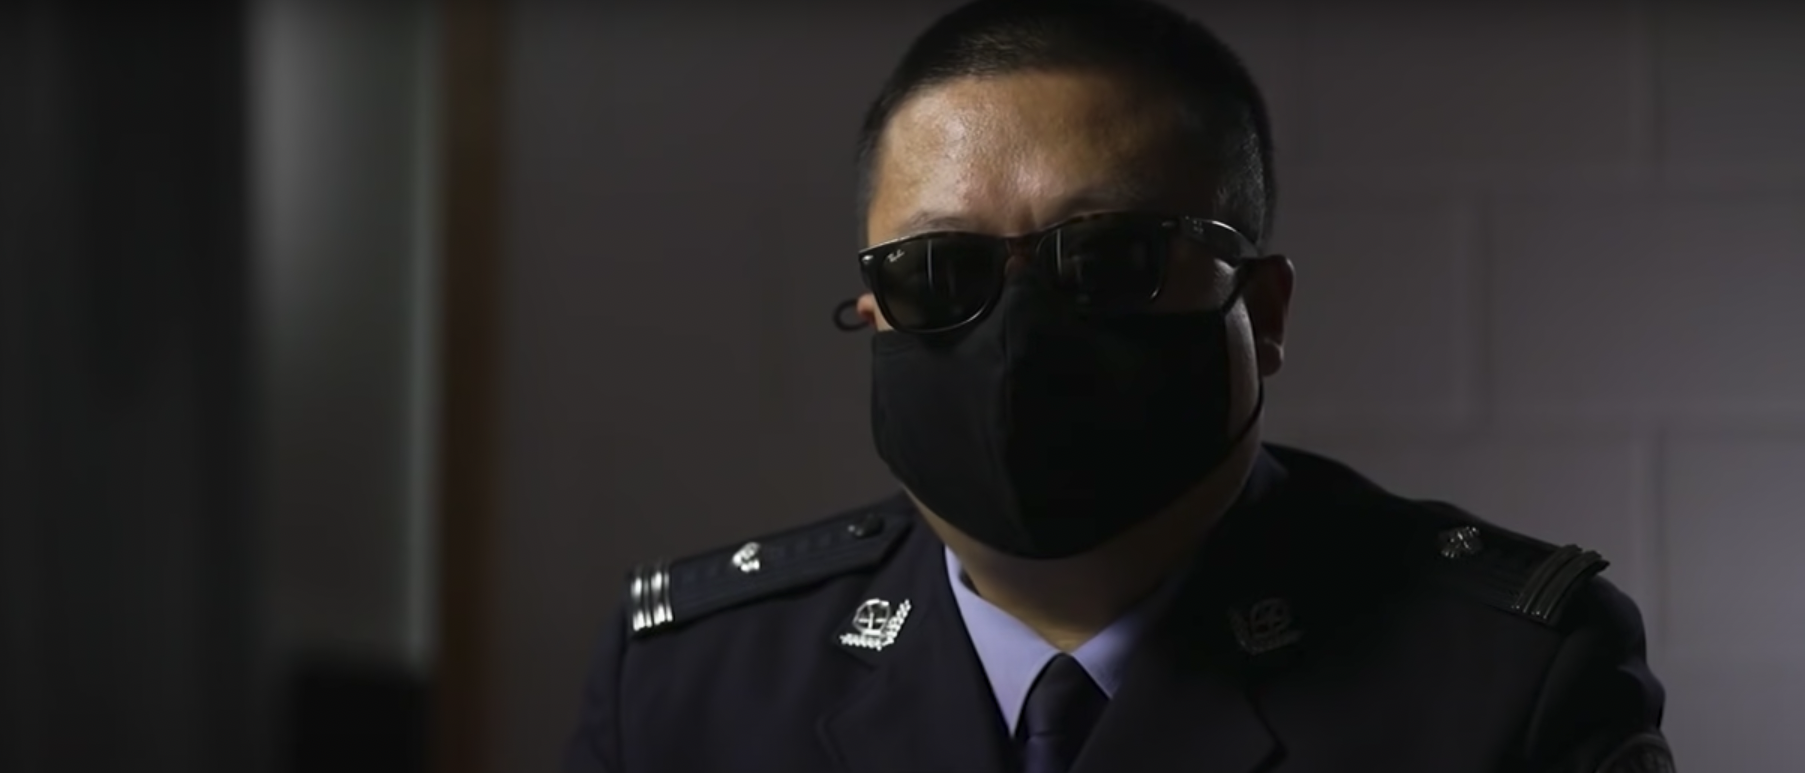 A self-proclaimed former member of Chinese security forces told CNN he was ordered to “arrest and torture” Uyghur prisoners during an October 2021 interview. [YouTube/Screenshot/CNNArabic]